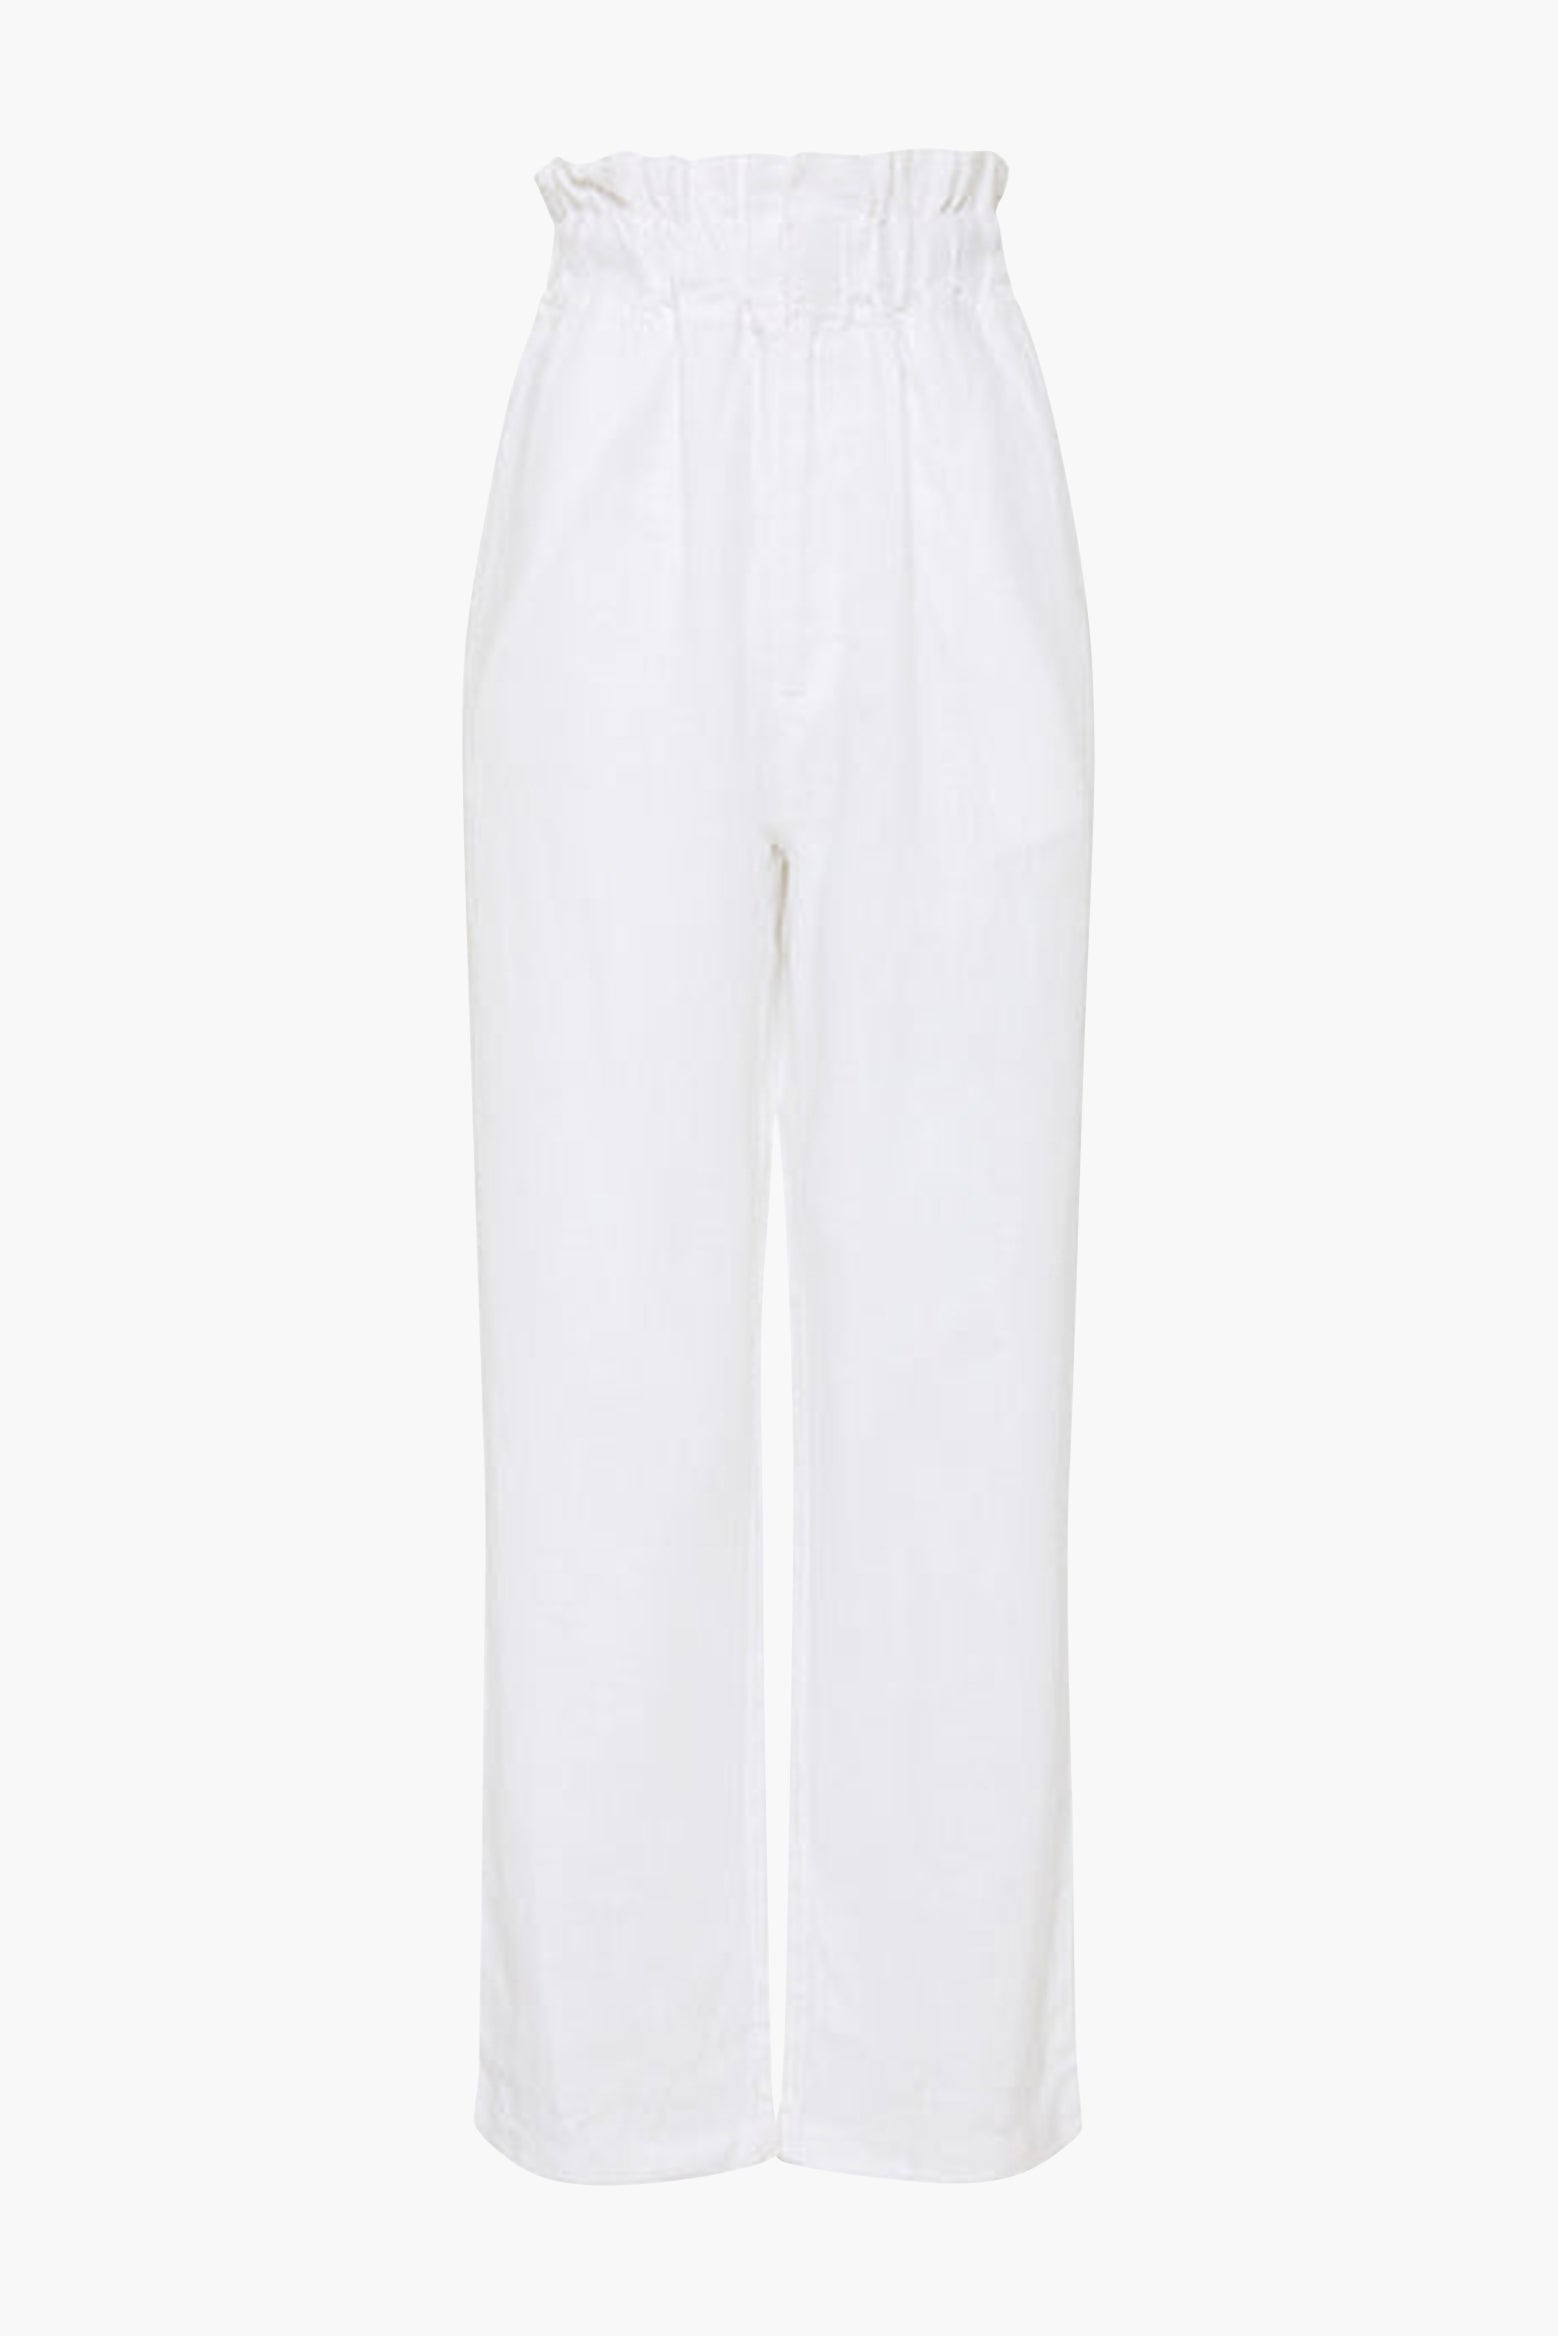 Posse Ducky Pant in Ivory available at TNT The New Trend Australia